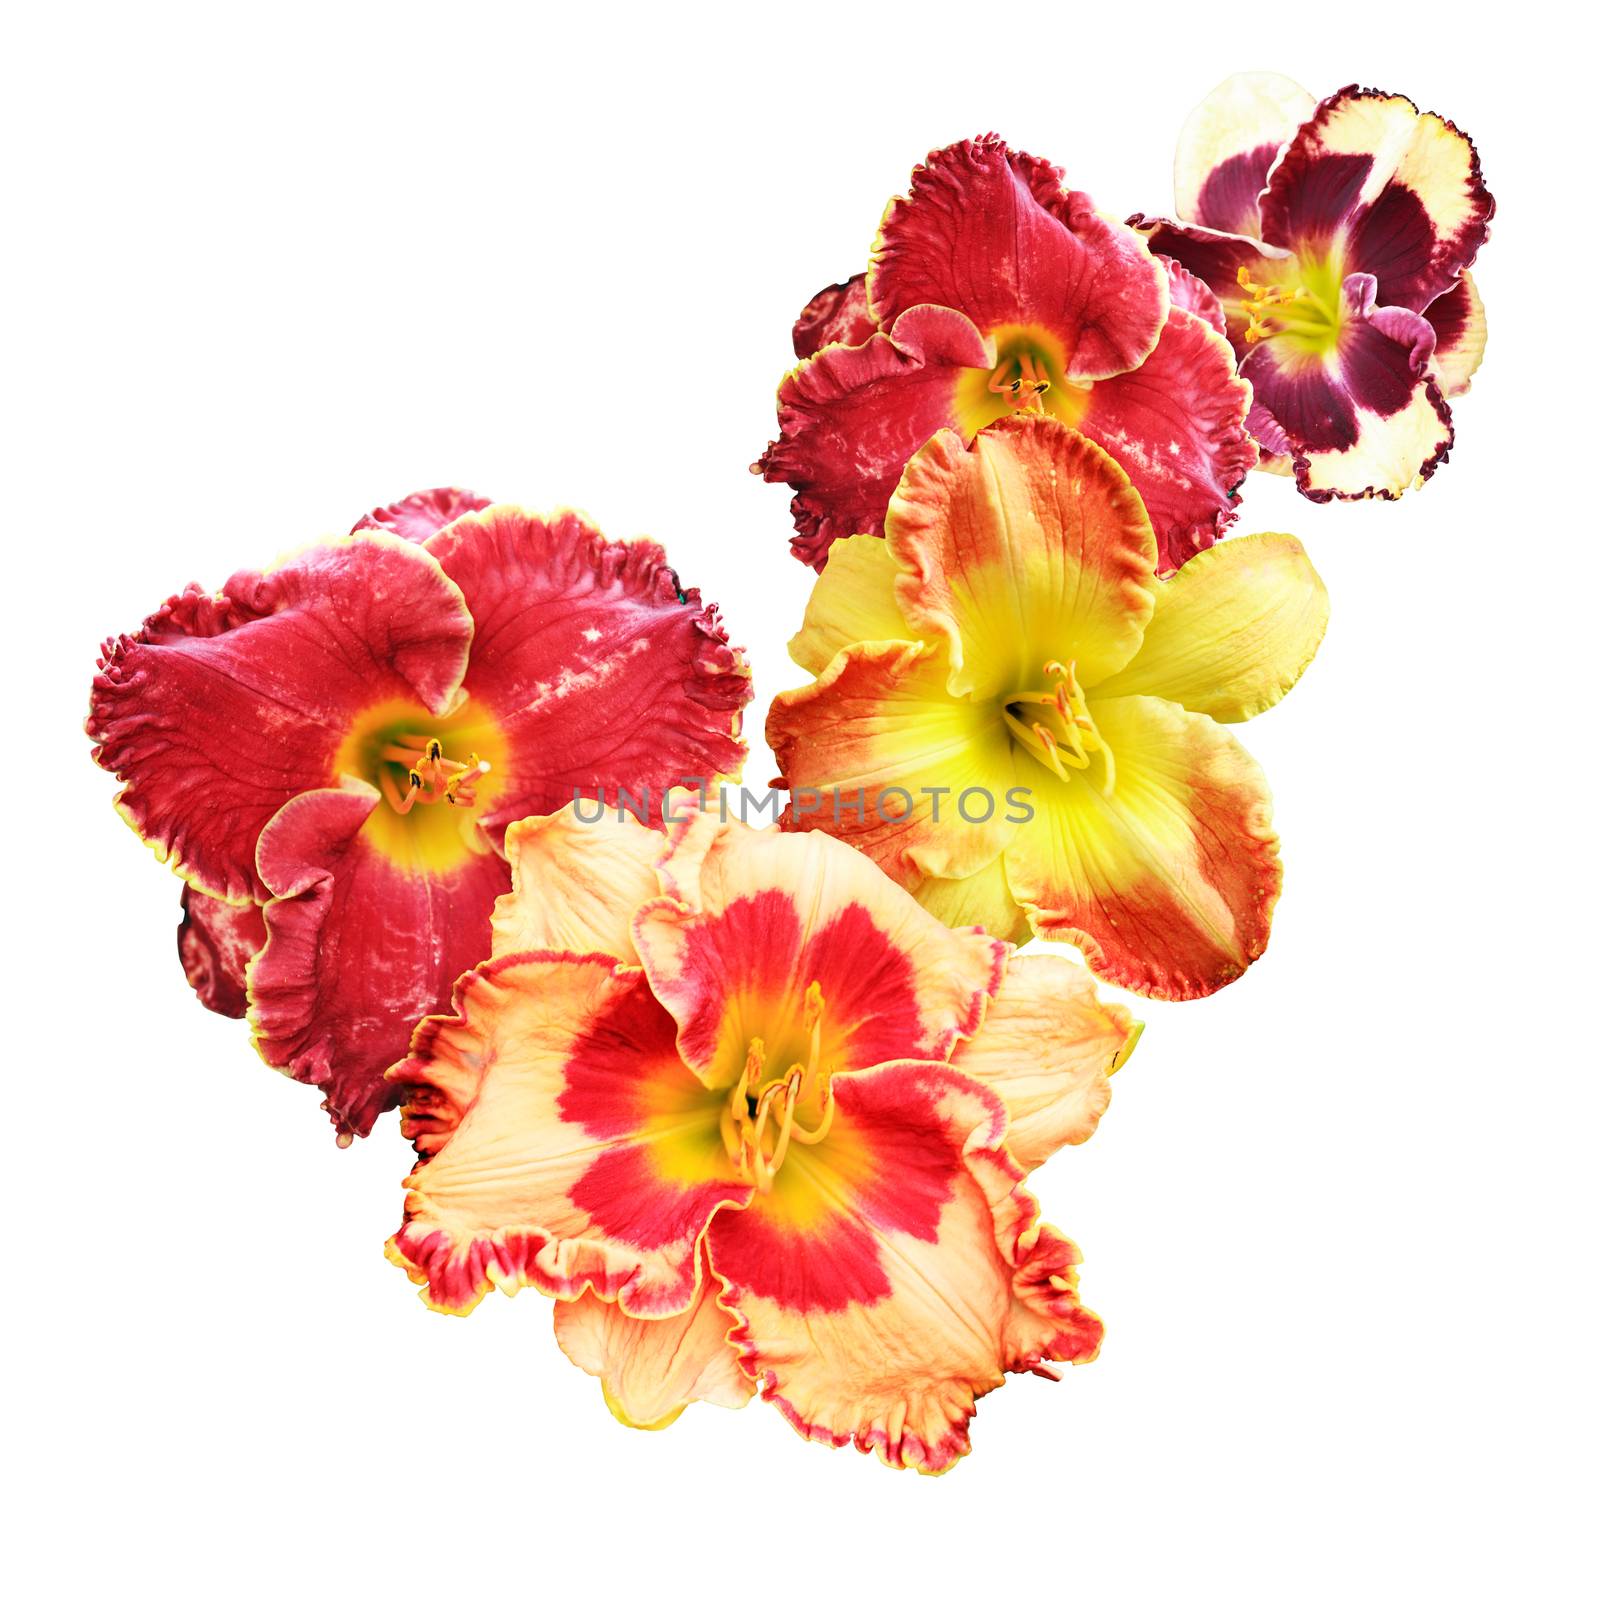 Nice vignette made from variety flowers on white background